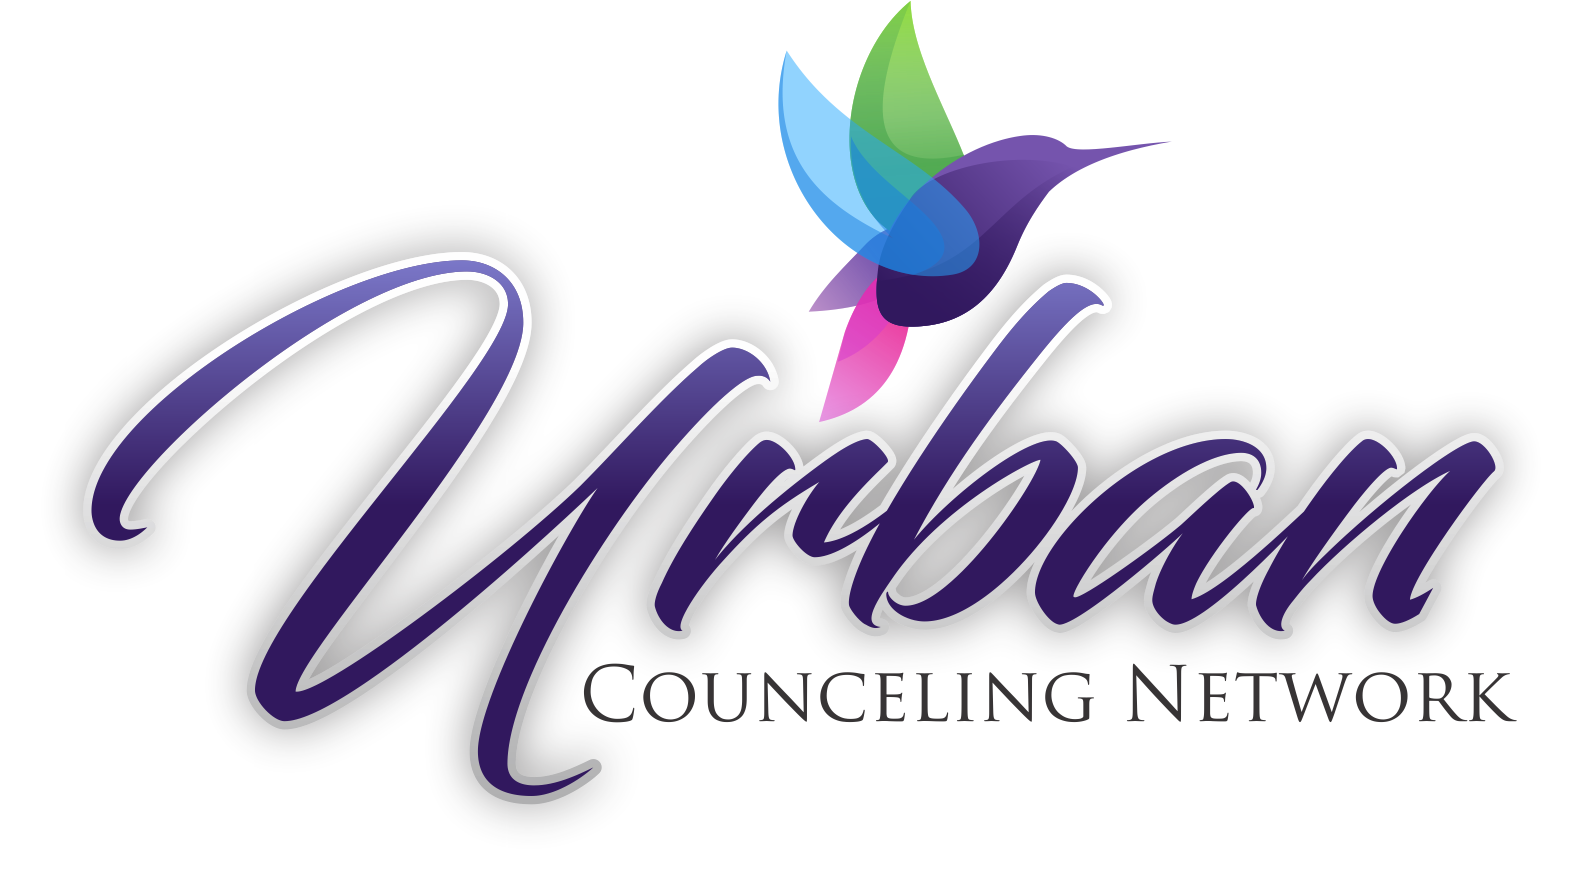 Urban Counseling Network